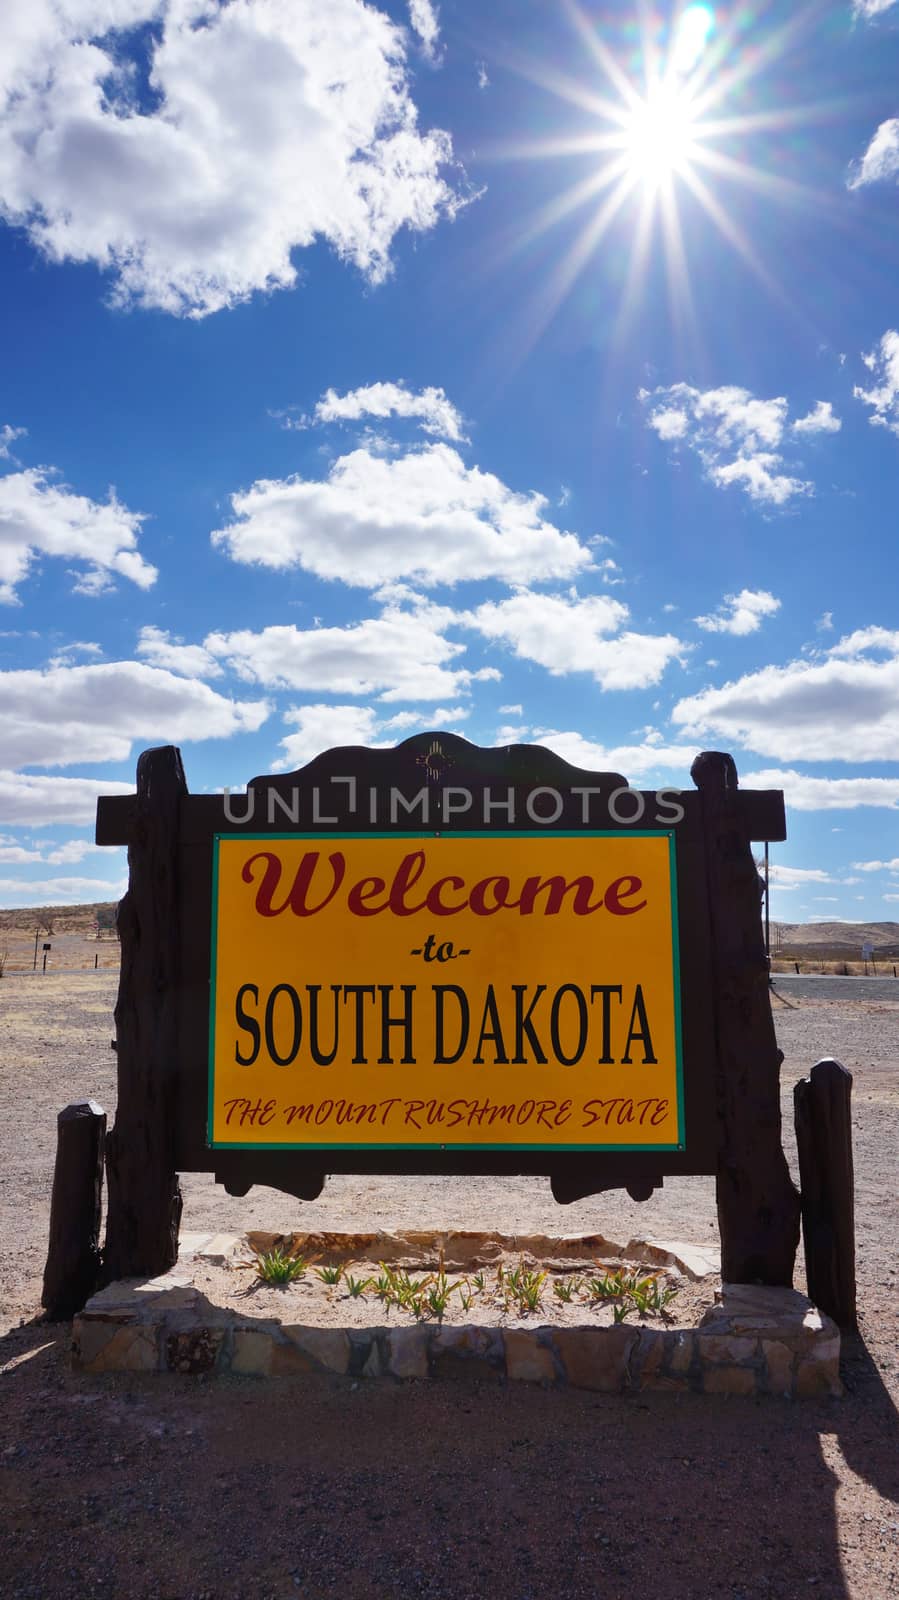 Welcome to South Dakota road sign by tang90246